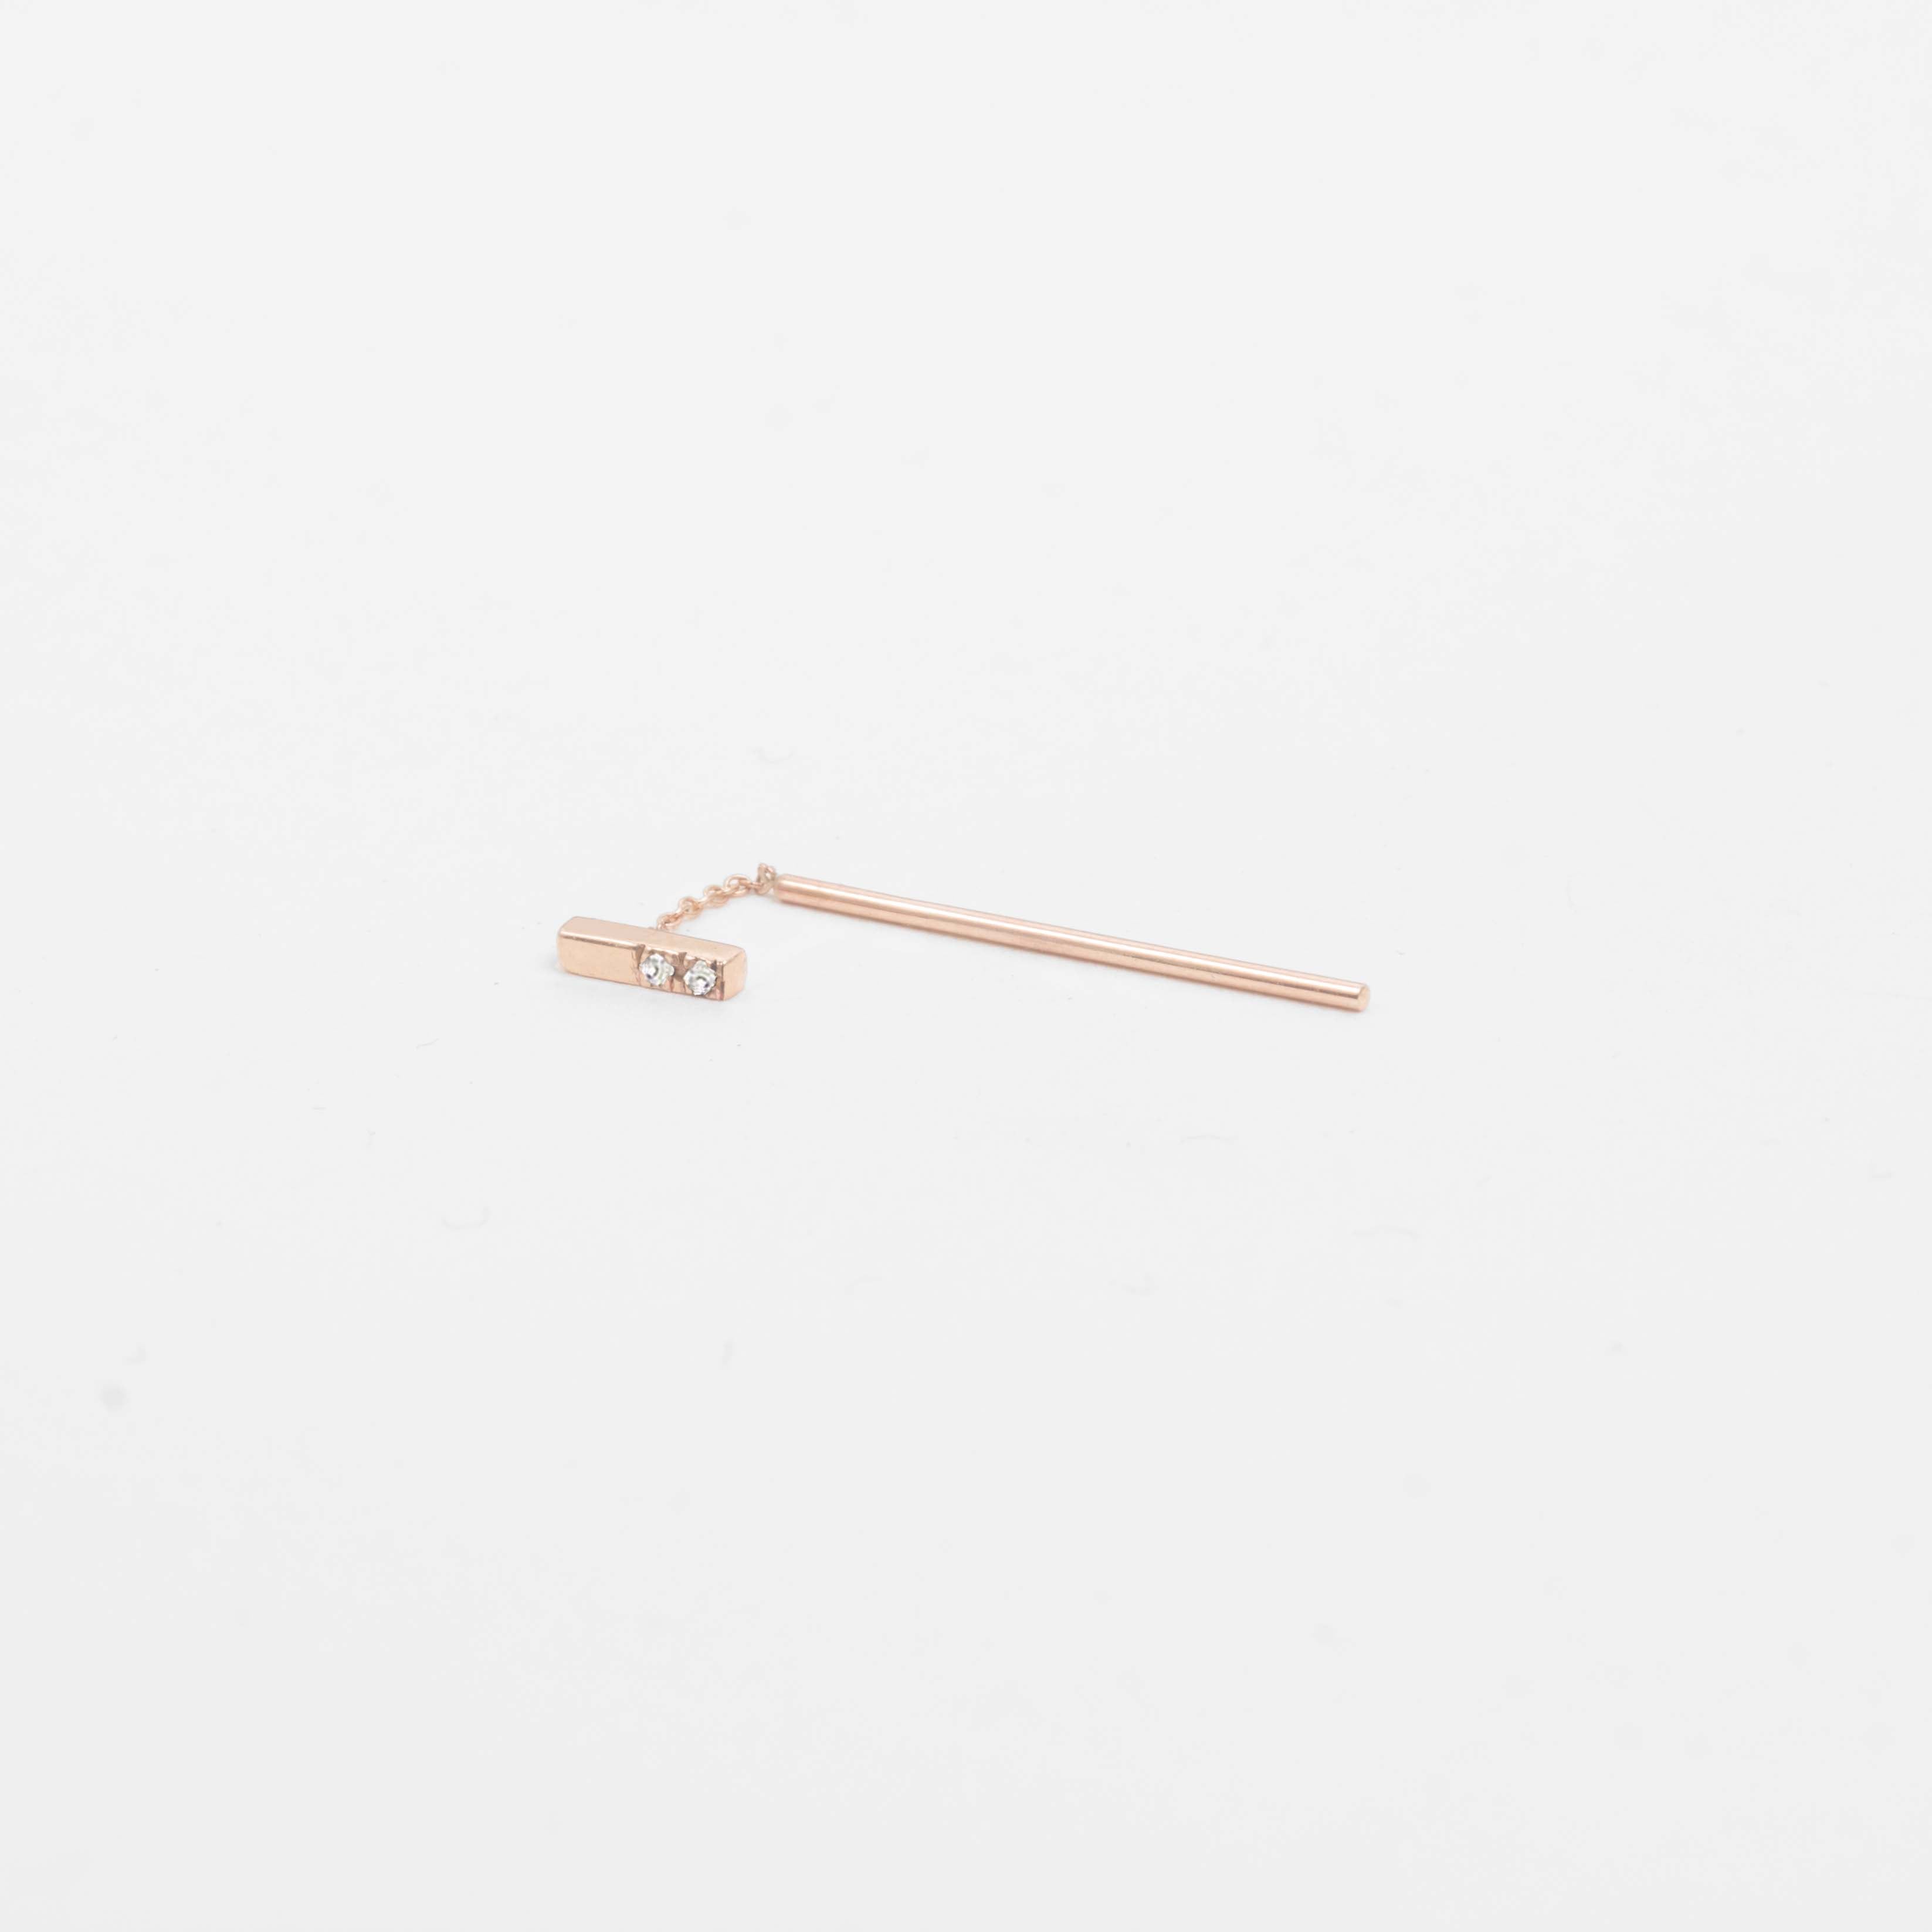 Olko Short Delicate Pull Through Earring 14k Gold set with White Diamond By SHW Fine Jewelry NYC